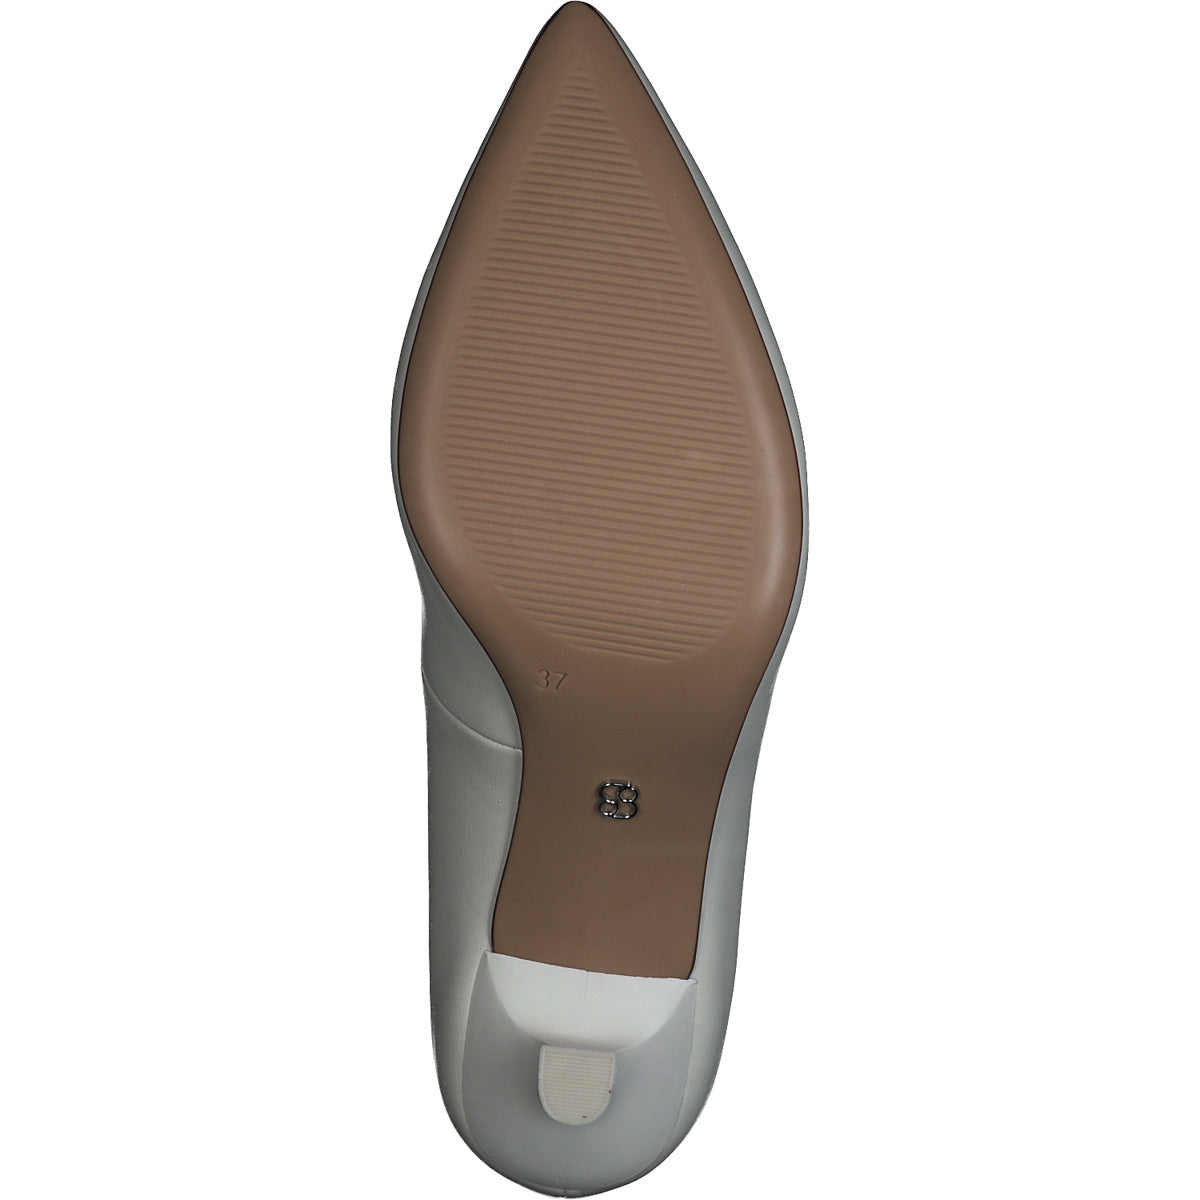 Effortless Sophistication Smooth Pointed Toe Court Shoes